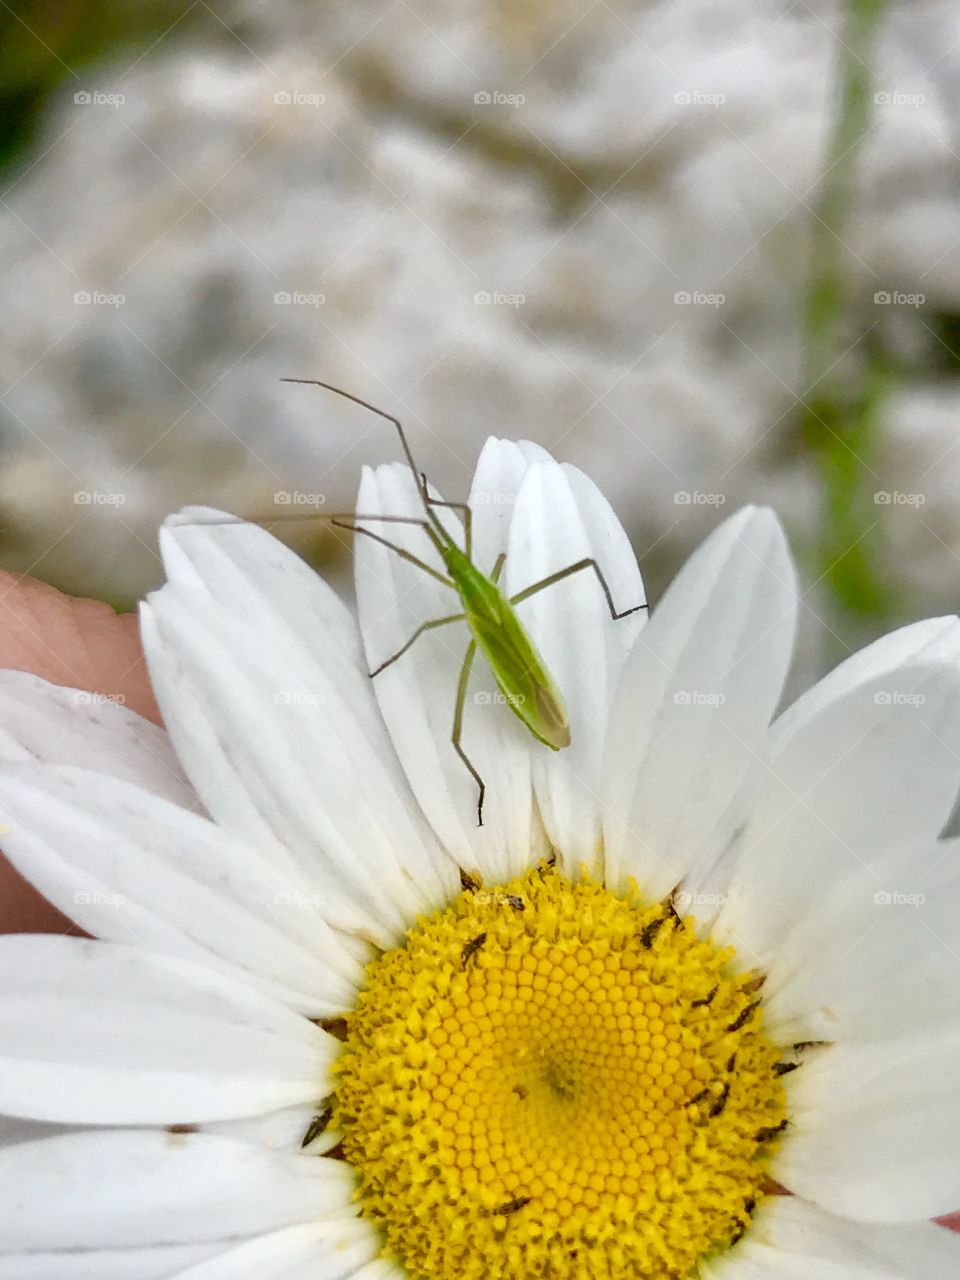 Insects like daisies too